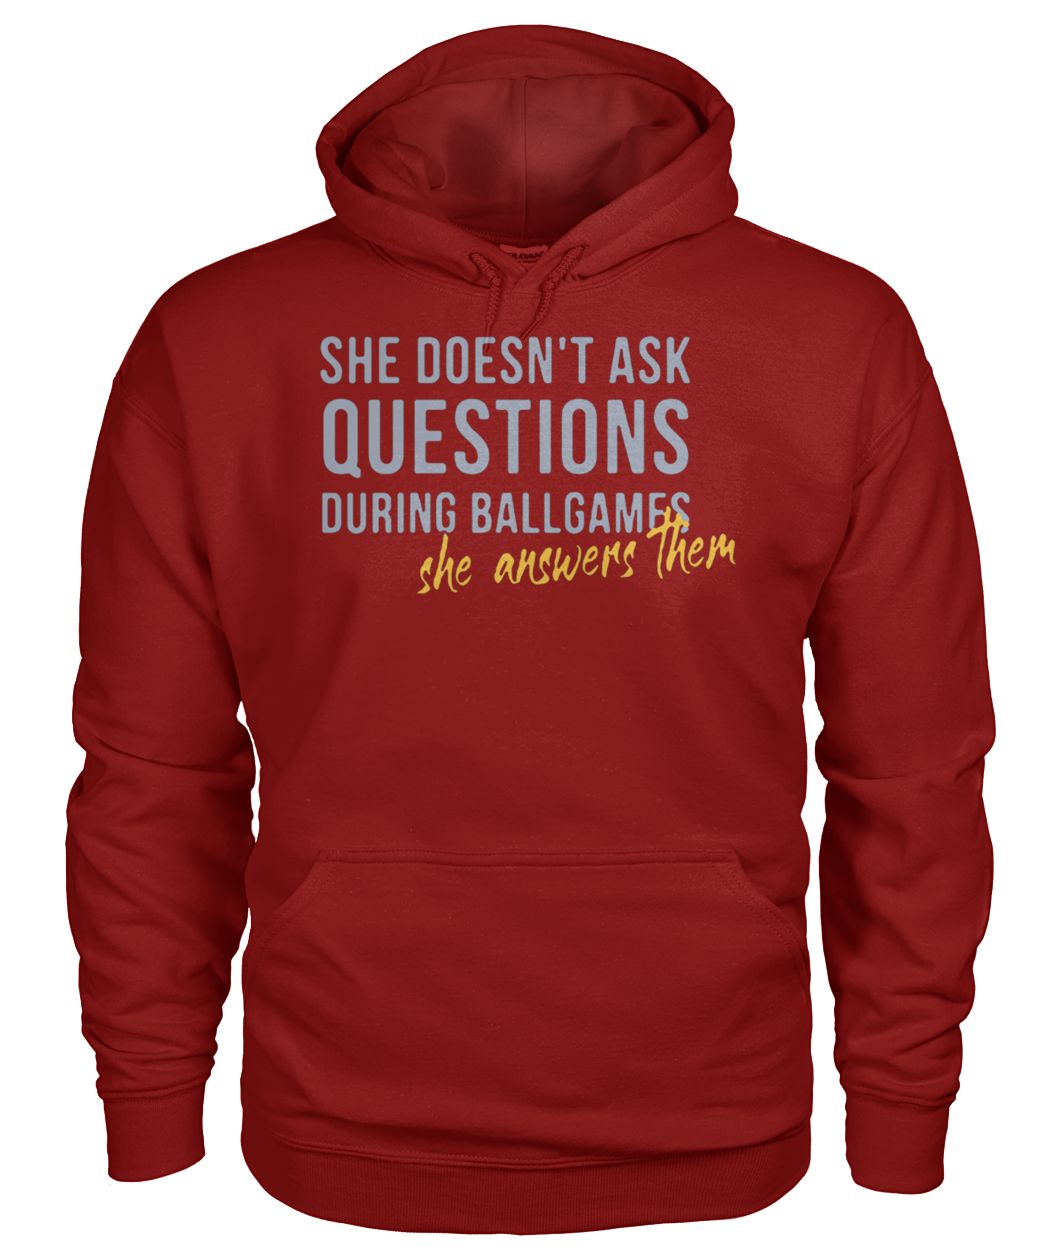 She doesn't ask questions during ballgames she answers them gildan hoodie